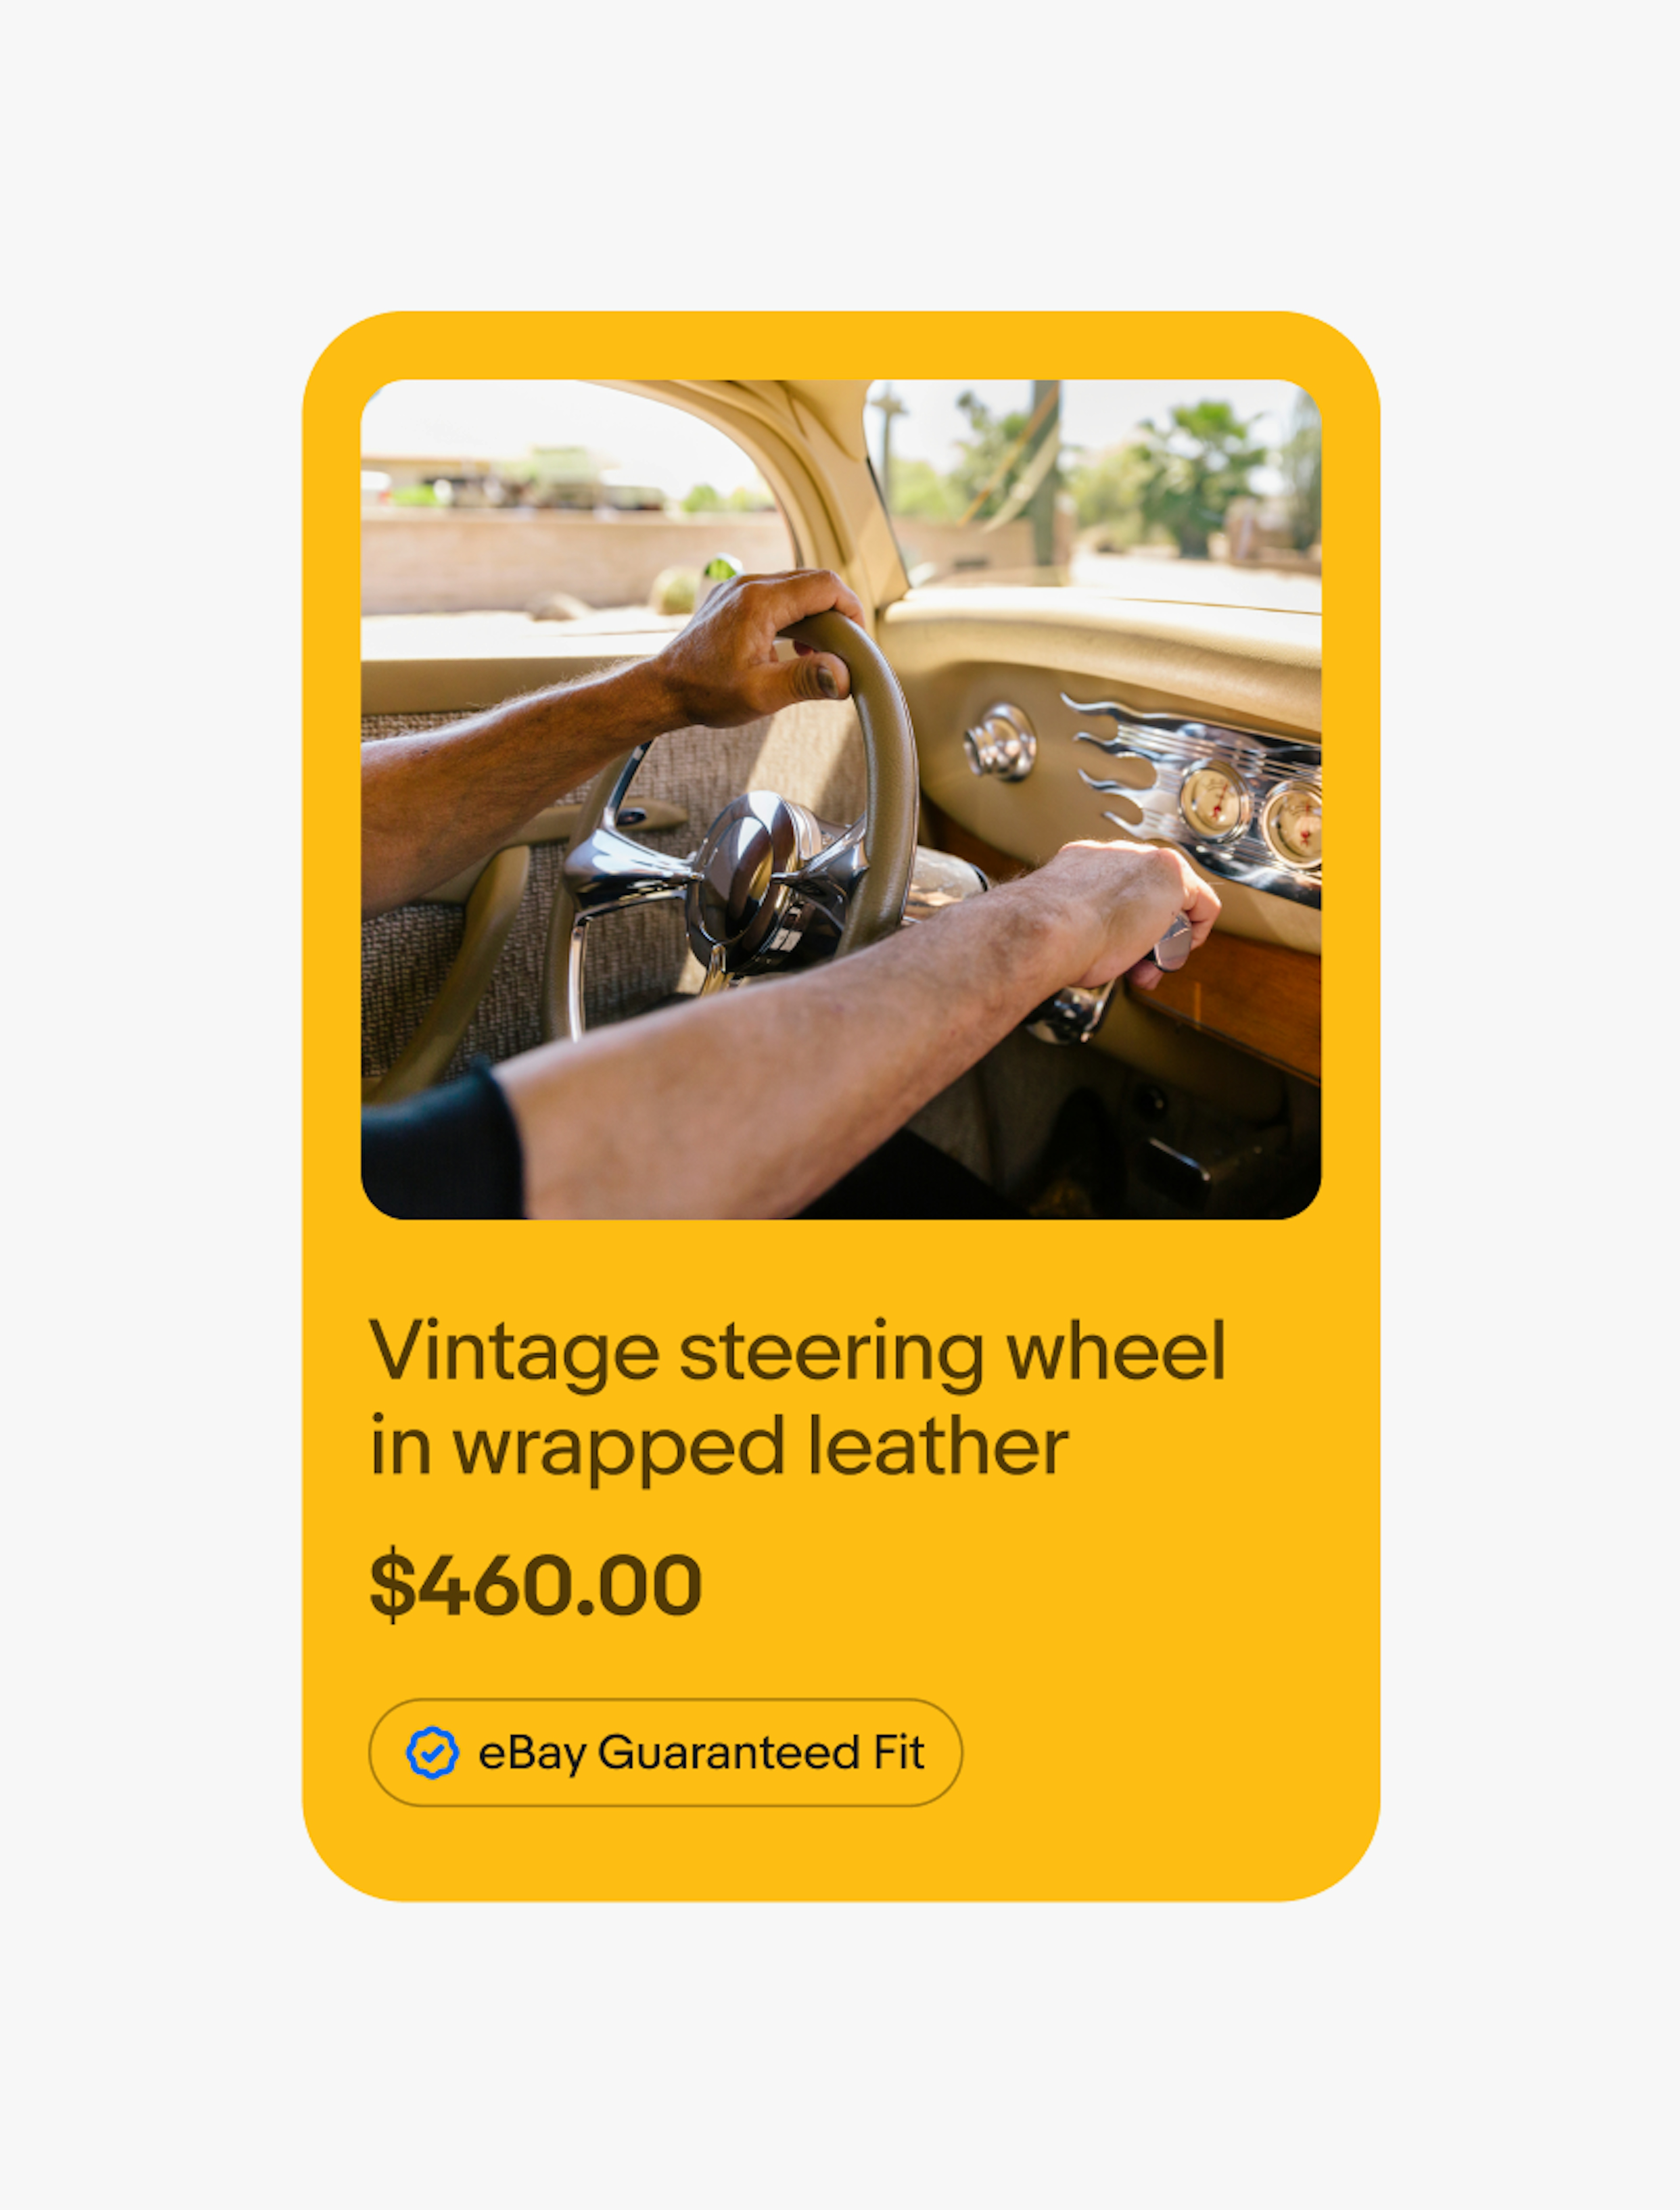 A vibrant yellow tone-on-tone layout with a program badge in blue.